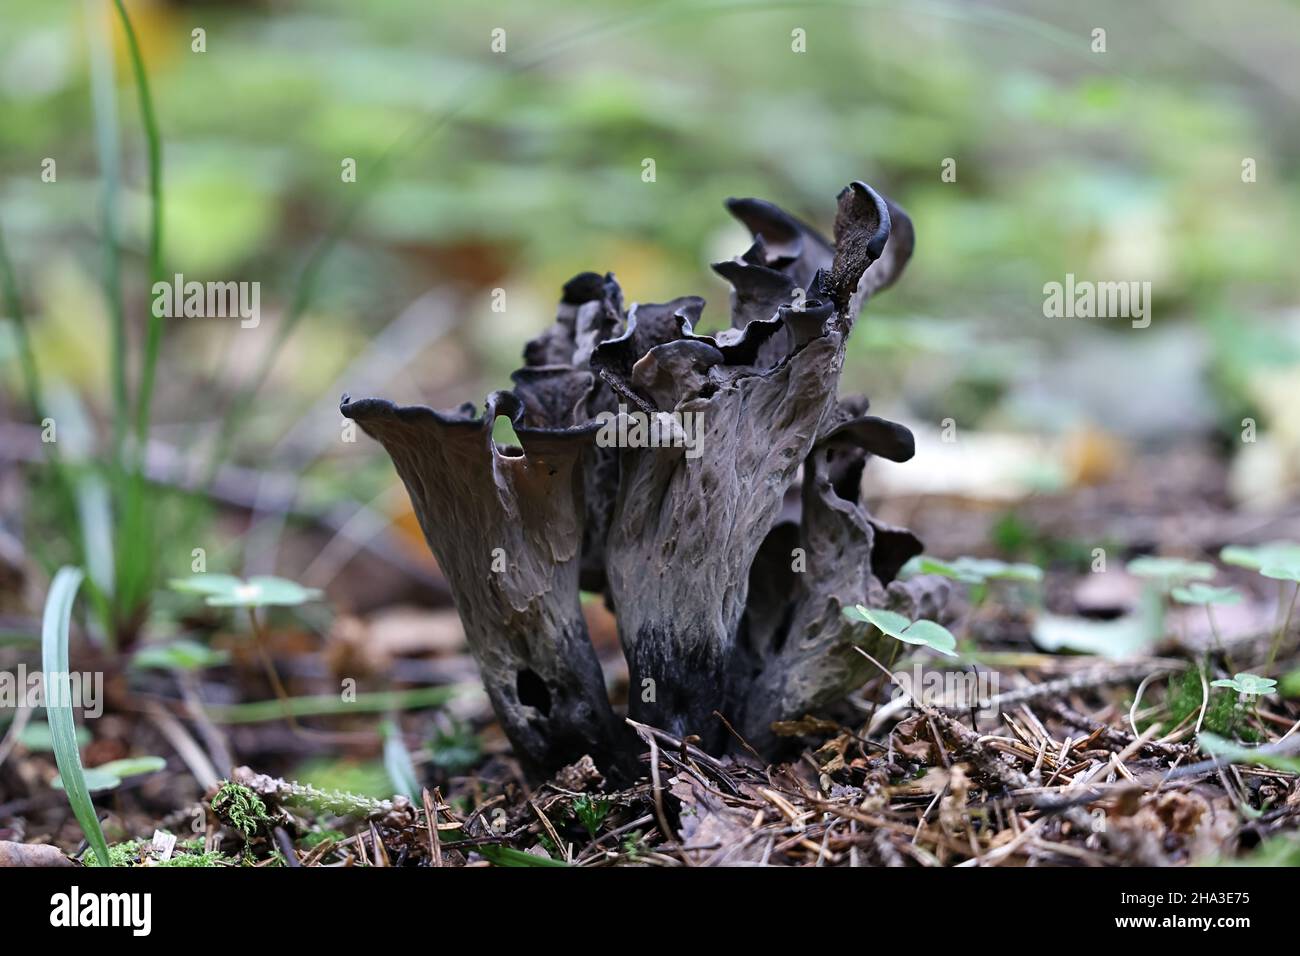 Craterellus cornucopioides, commonly known as the Horn of plenty, black chanterelle  or trumpet of the dead, wild mushroom from Finland Stock Photo